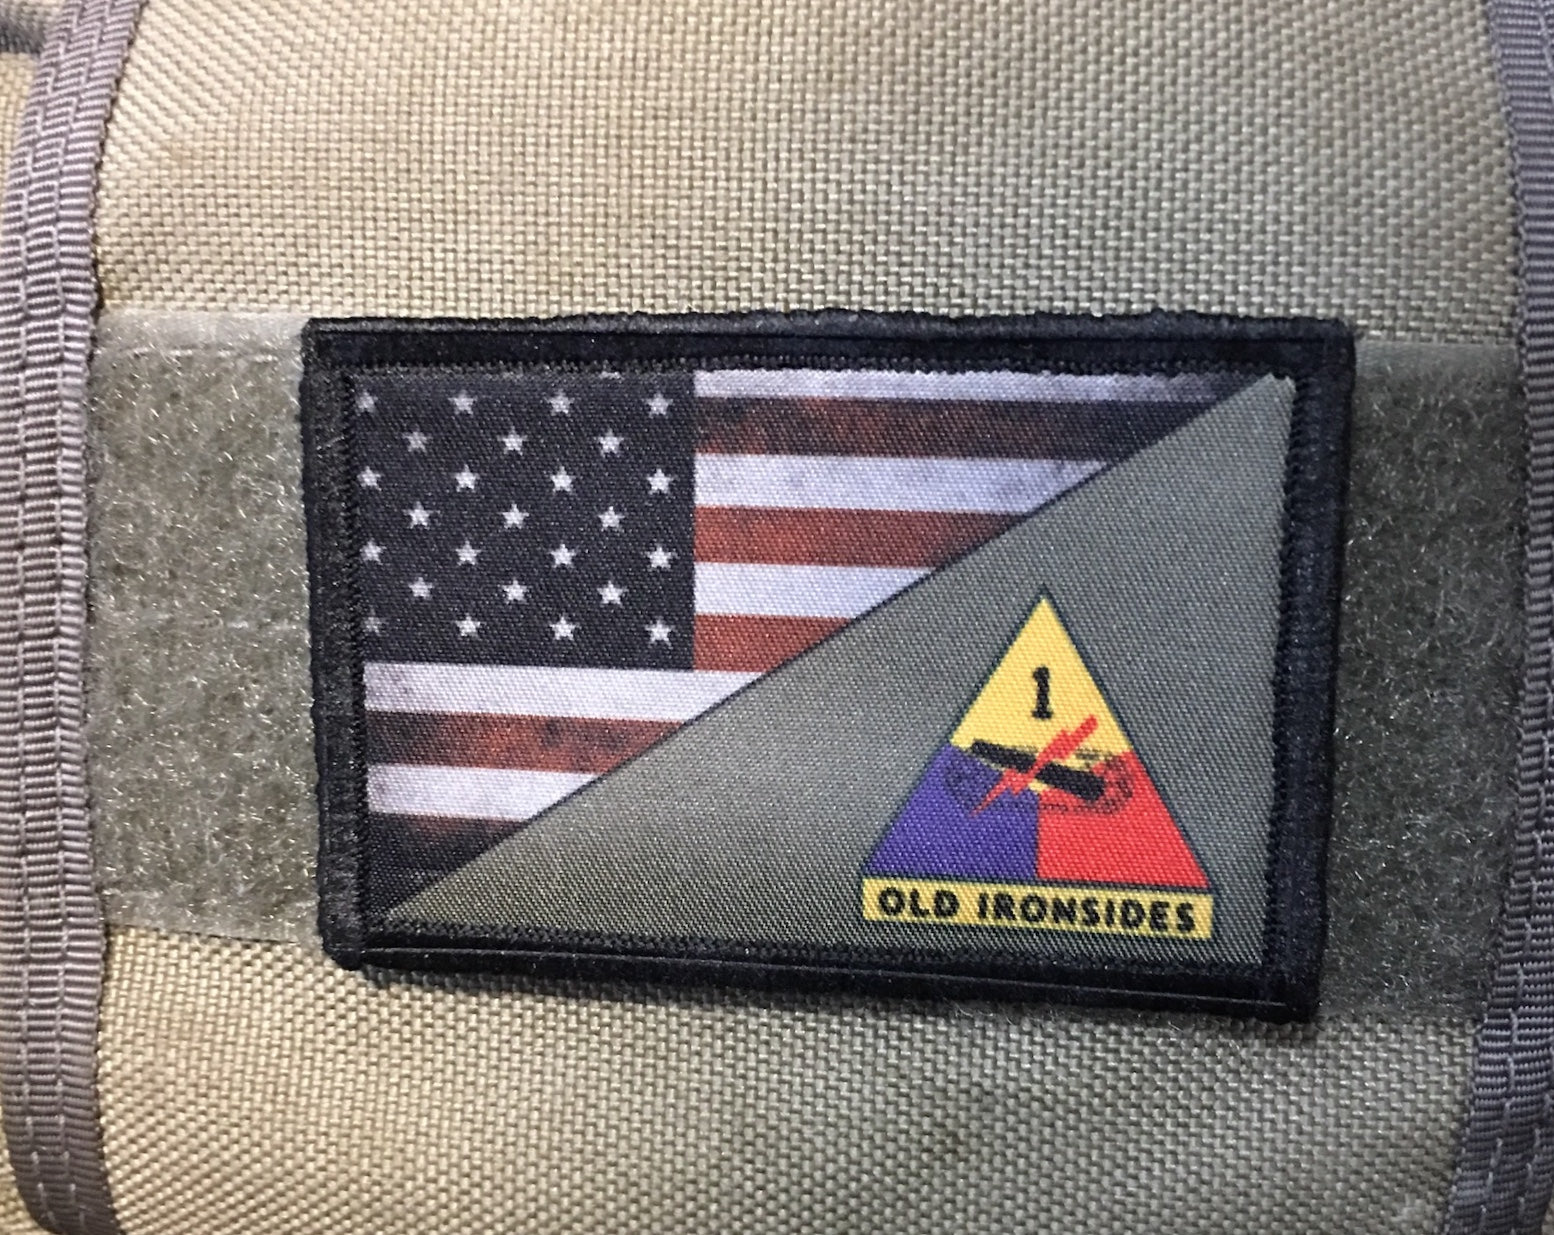 1st Armored Division Old Ironsides Morale Patch